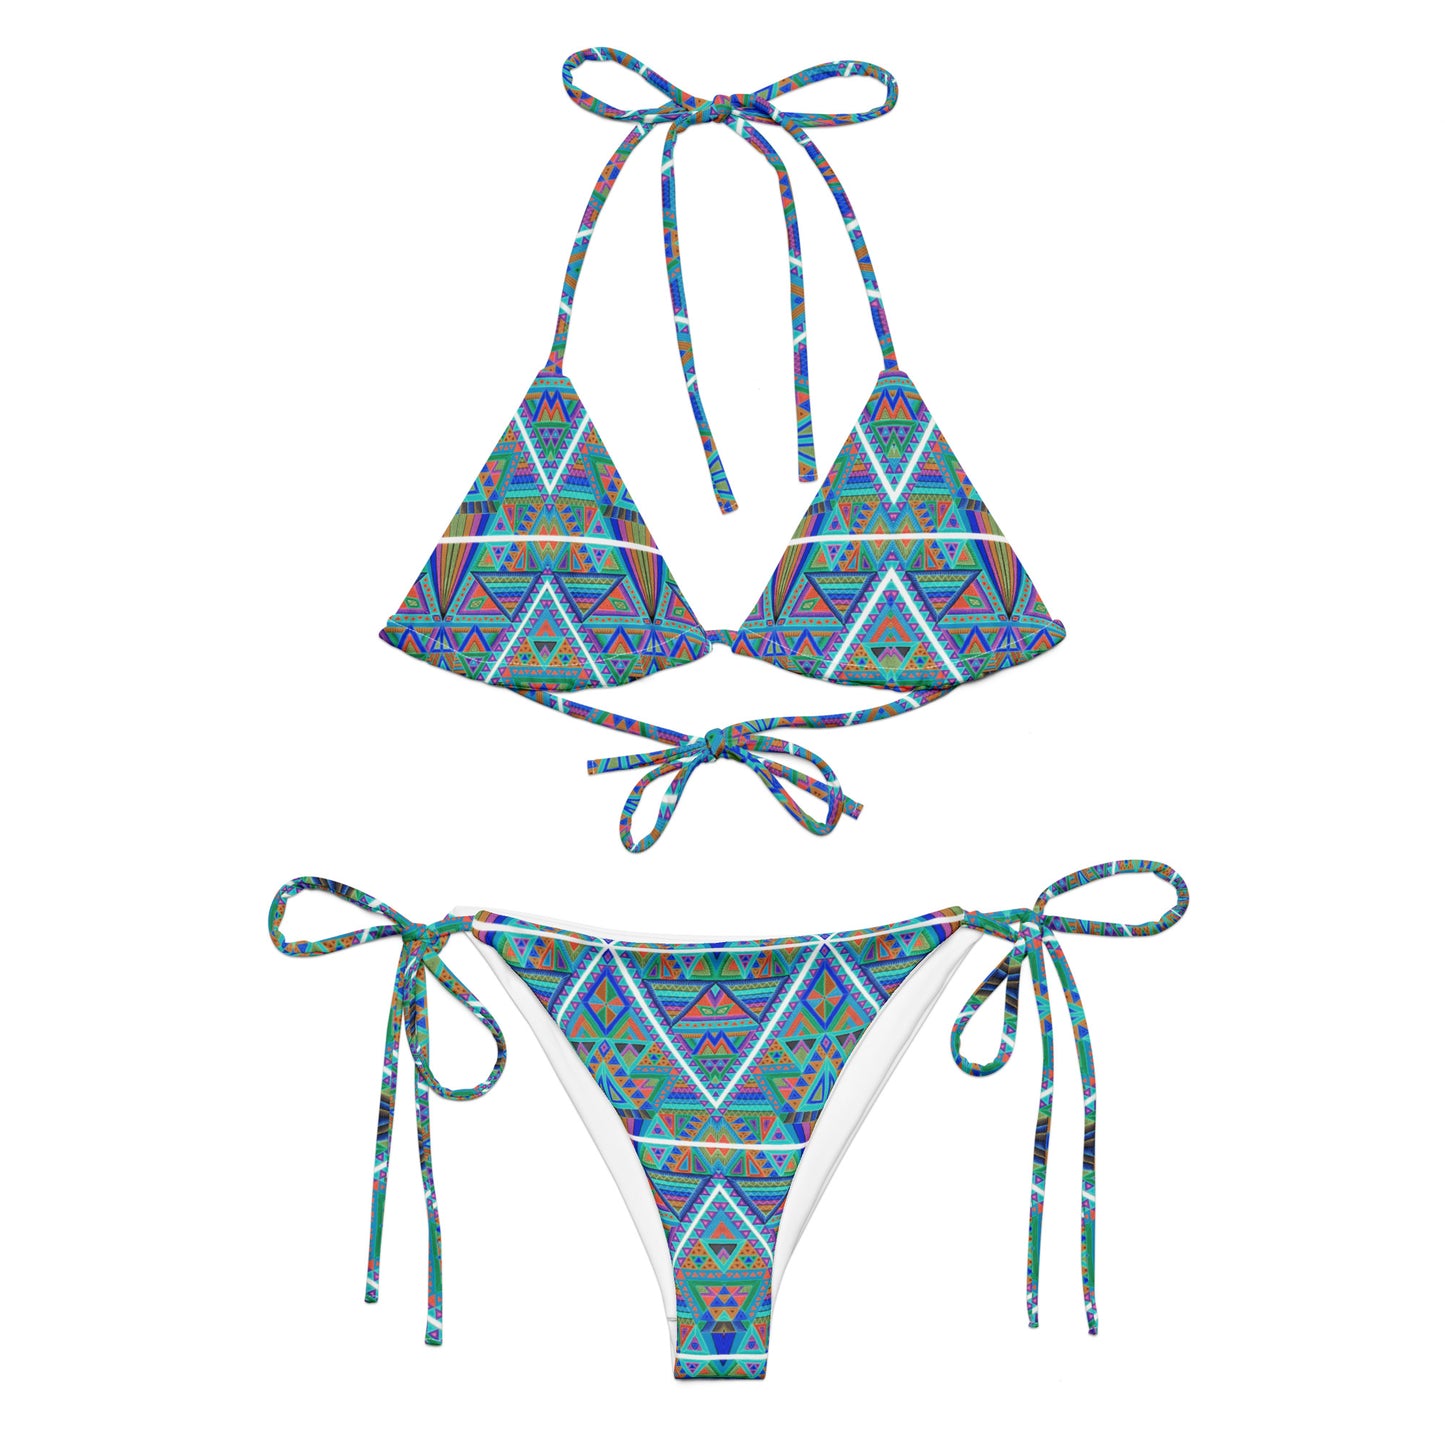 "DMT Inverted" recycled string bikini